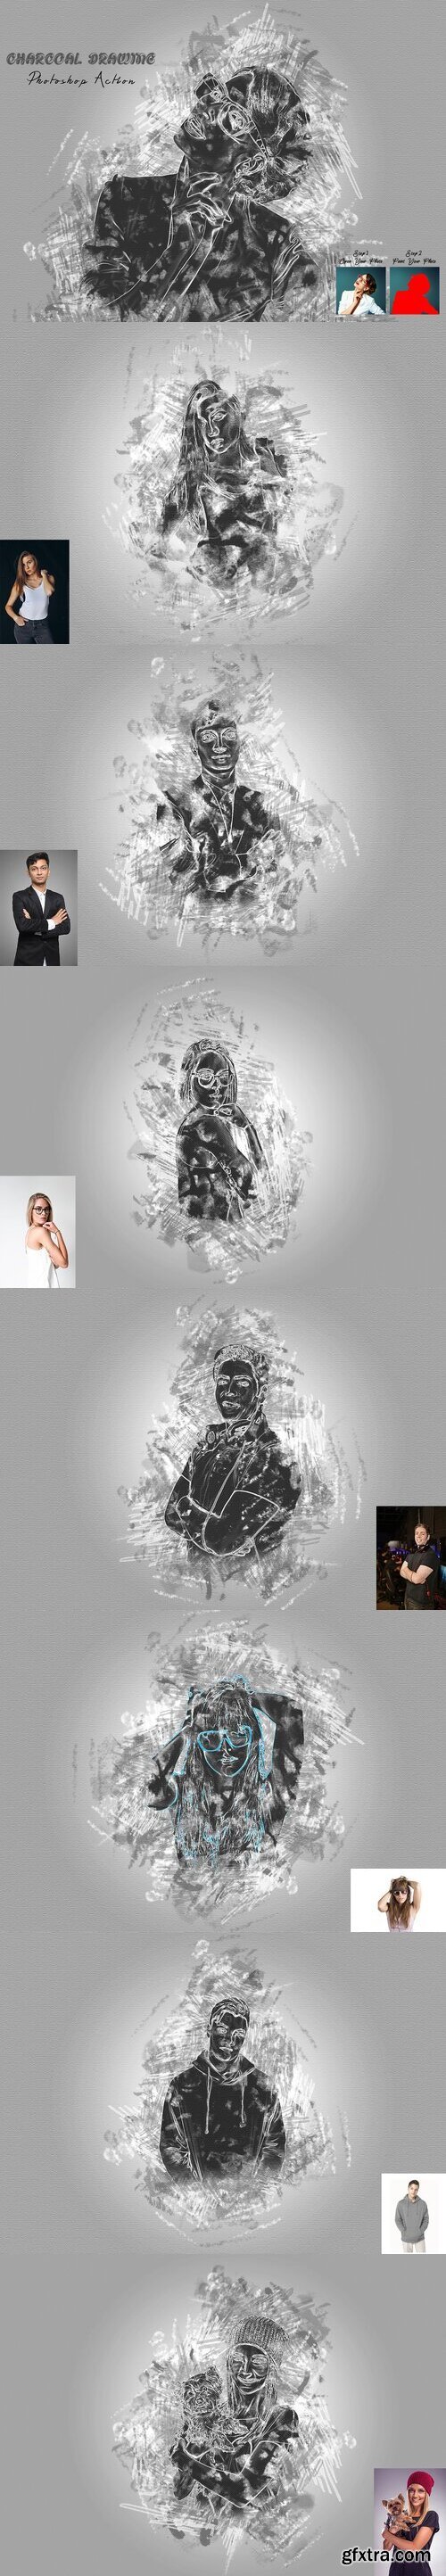 CreativeMarket - Charcoal Drawing Photoshop Action 7436787